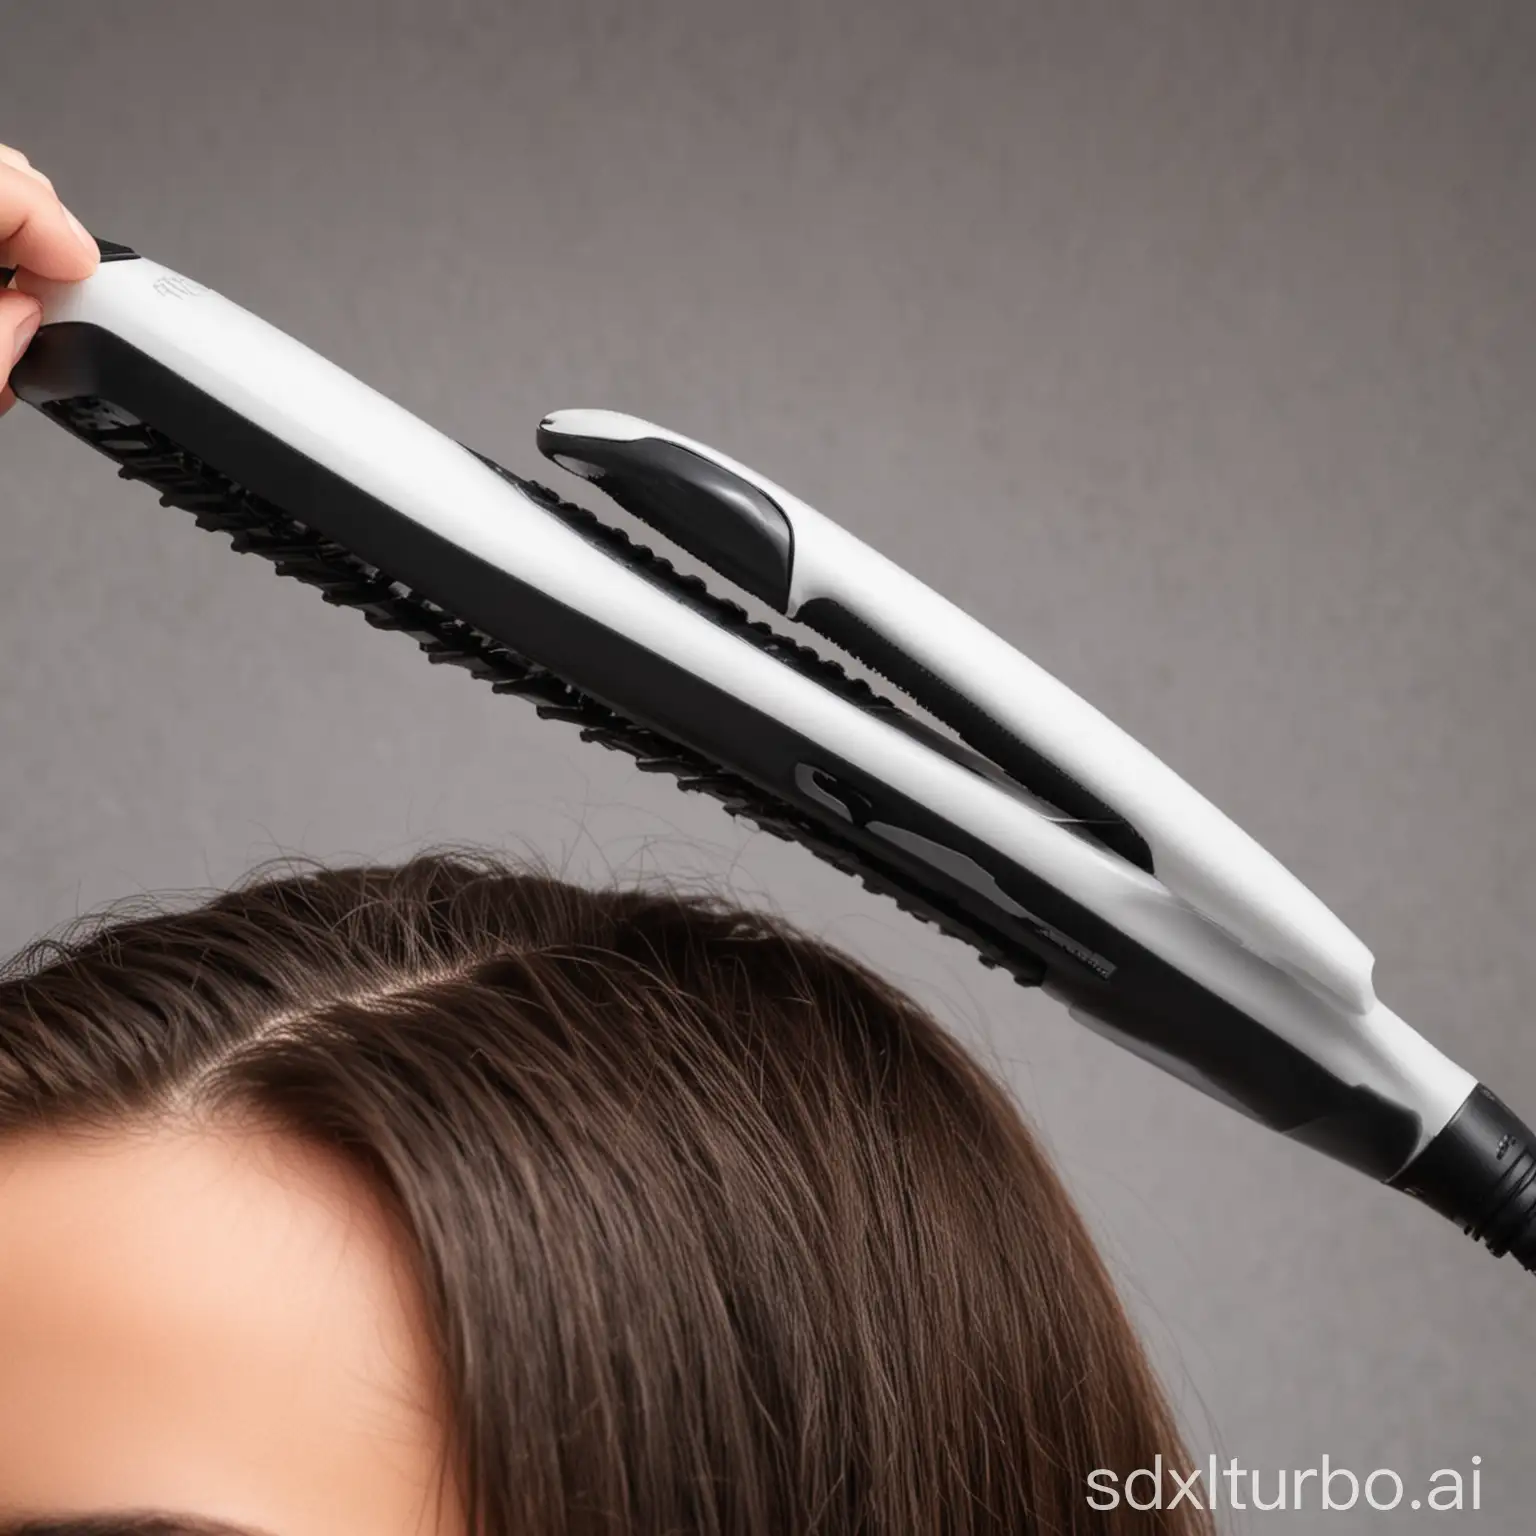 A close-up image of a hair straightener in use. The straightener is being used on a section of hair, and the steam from the straightener is visible. The hair is smooth and shiny, and the straightener is easy to grip and use.
